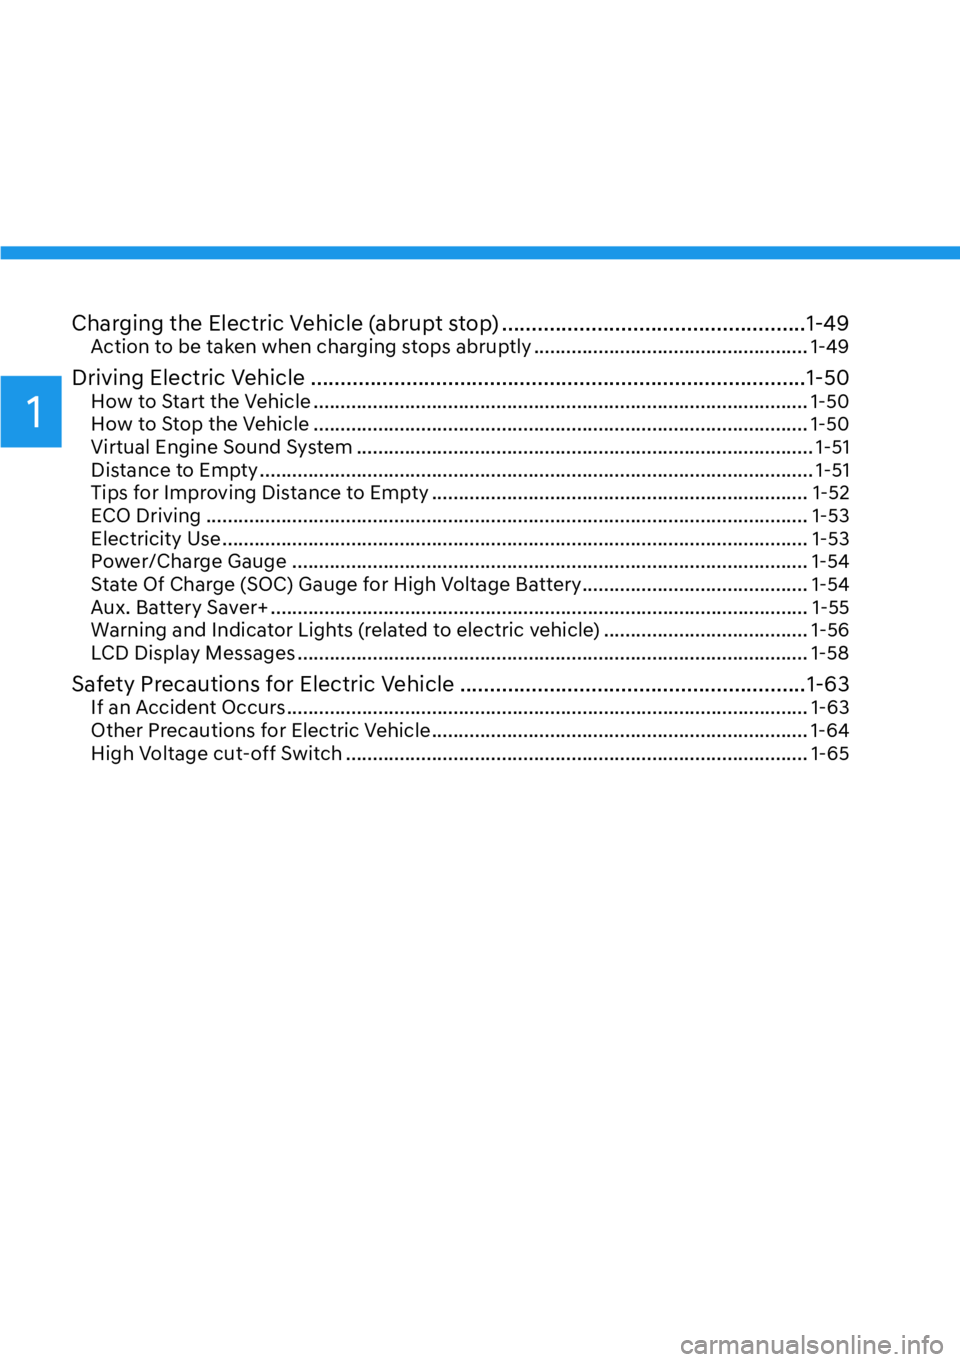 HYUNDAI IONIQ 5 2022  Owners Manual 1
Charging the Electric Vehicle (abrupt stop) ...................................................1-49Action to be taken when charging stops abruptly ...................................................